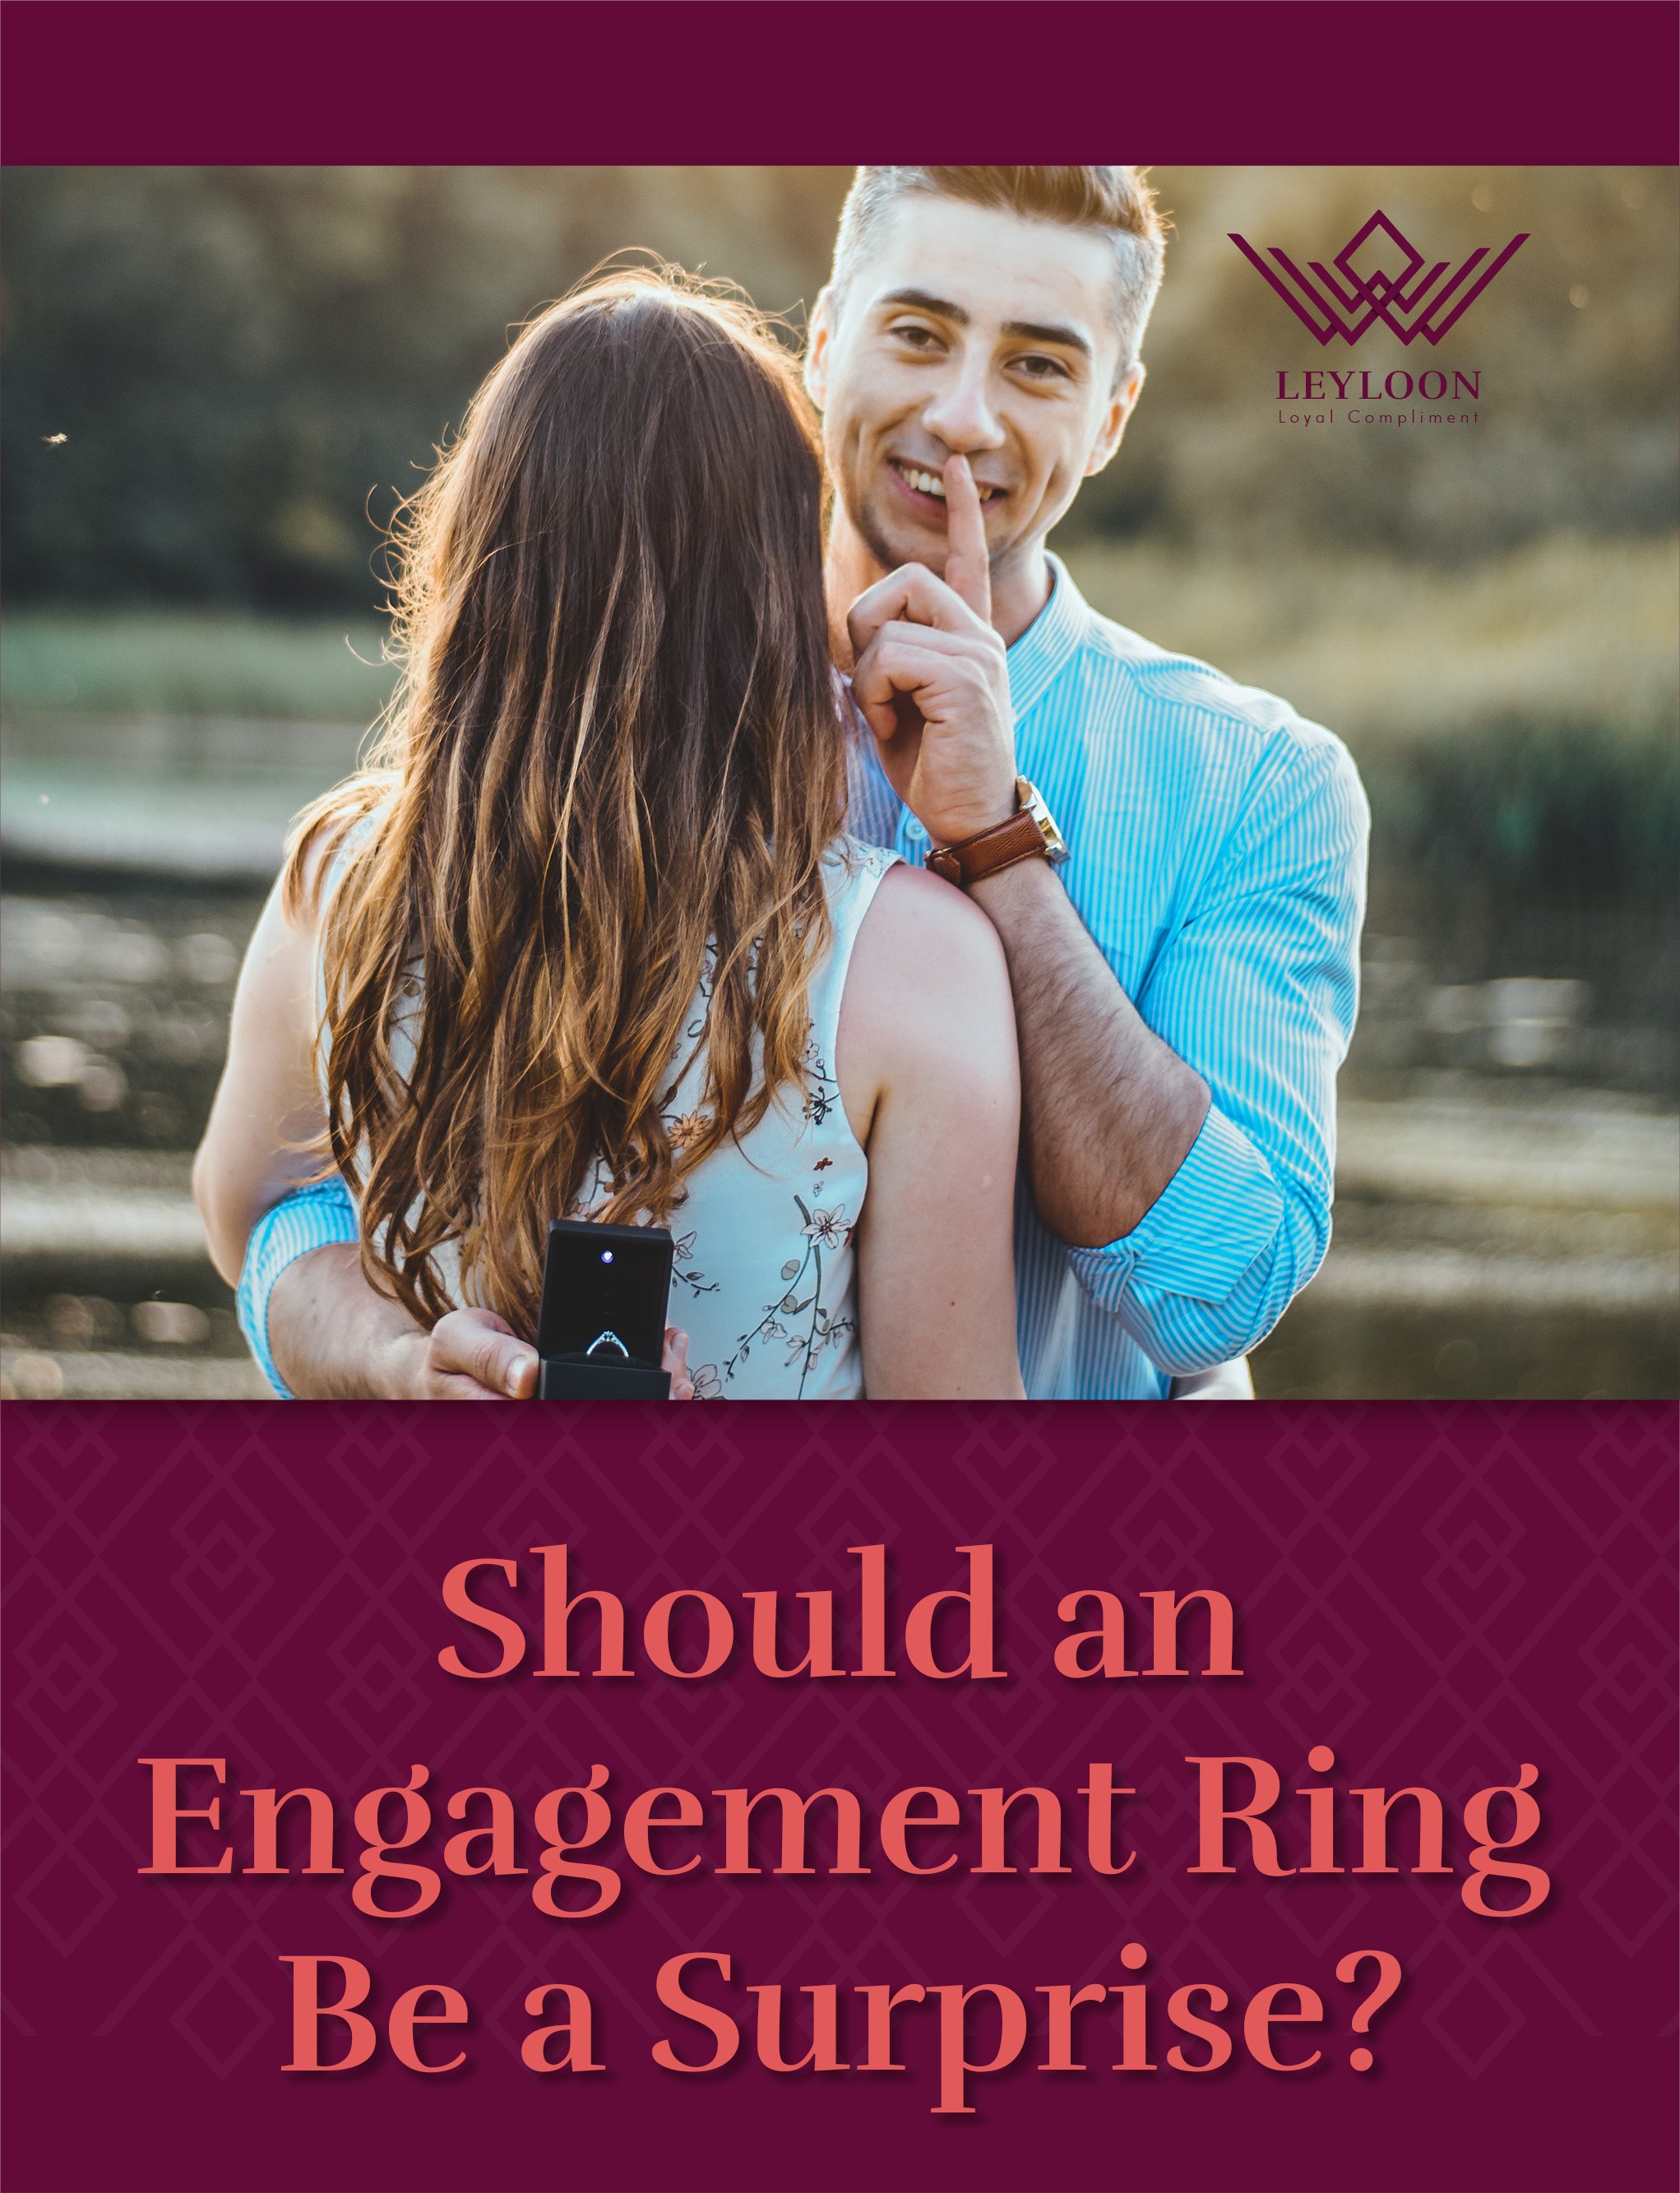 Should an Engagement Ring Be a Surprise?